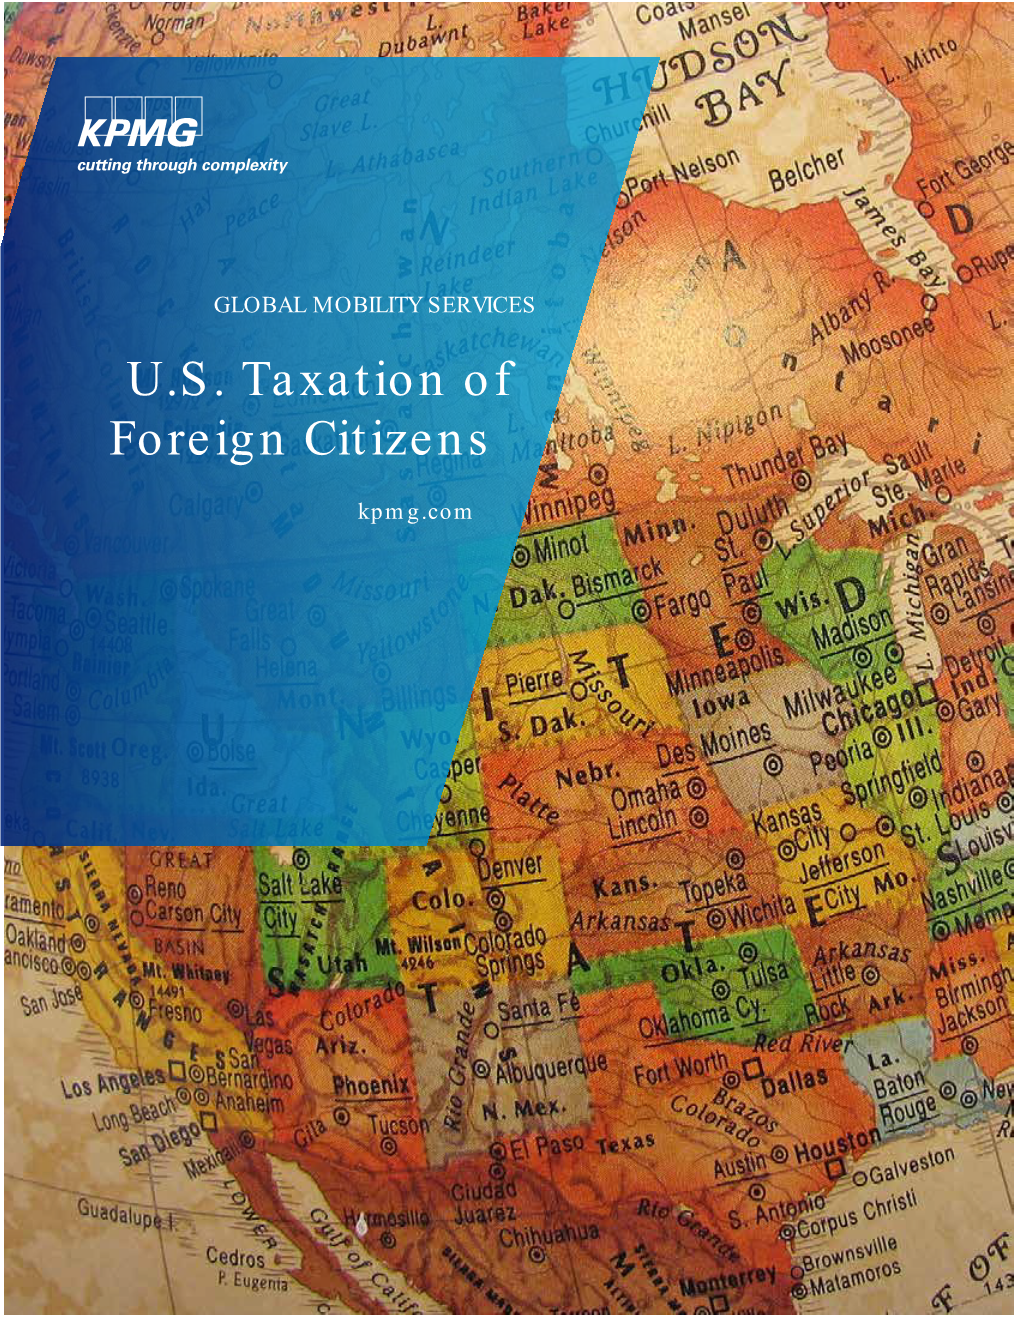 U.S. Taxation of Foreign Citizens